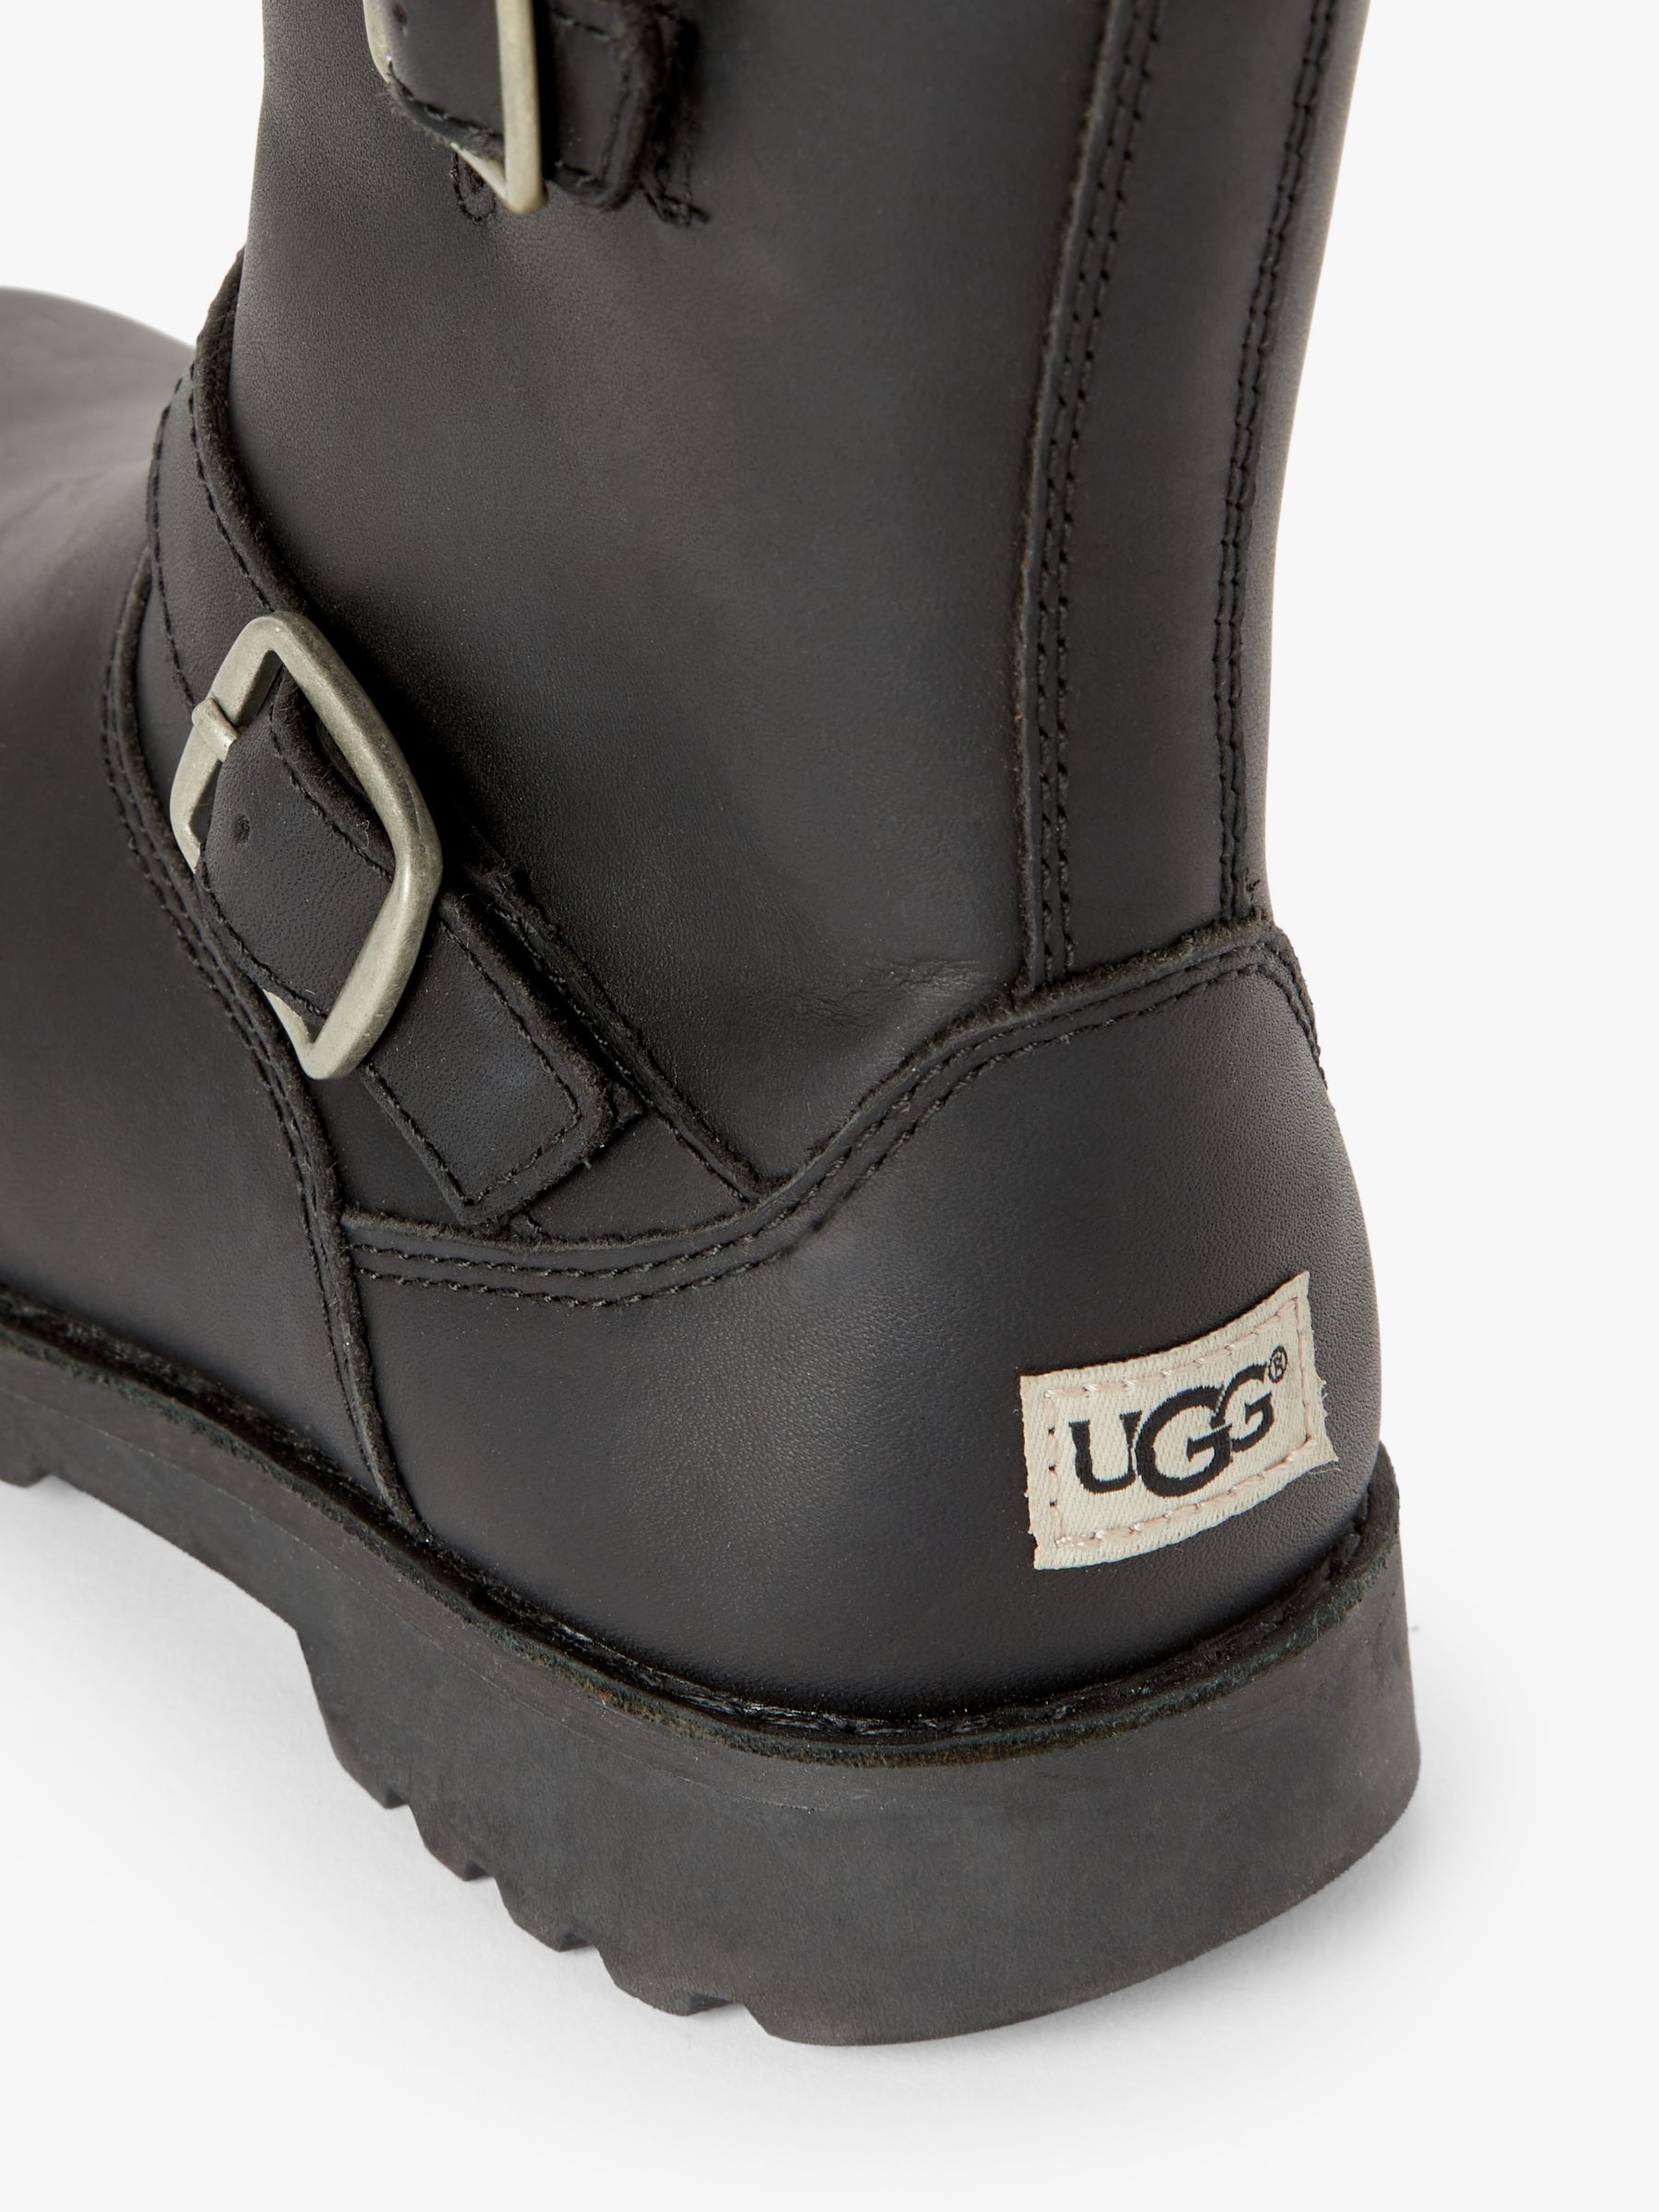 leather uggs boots